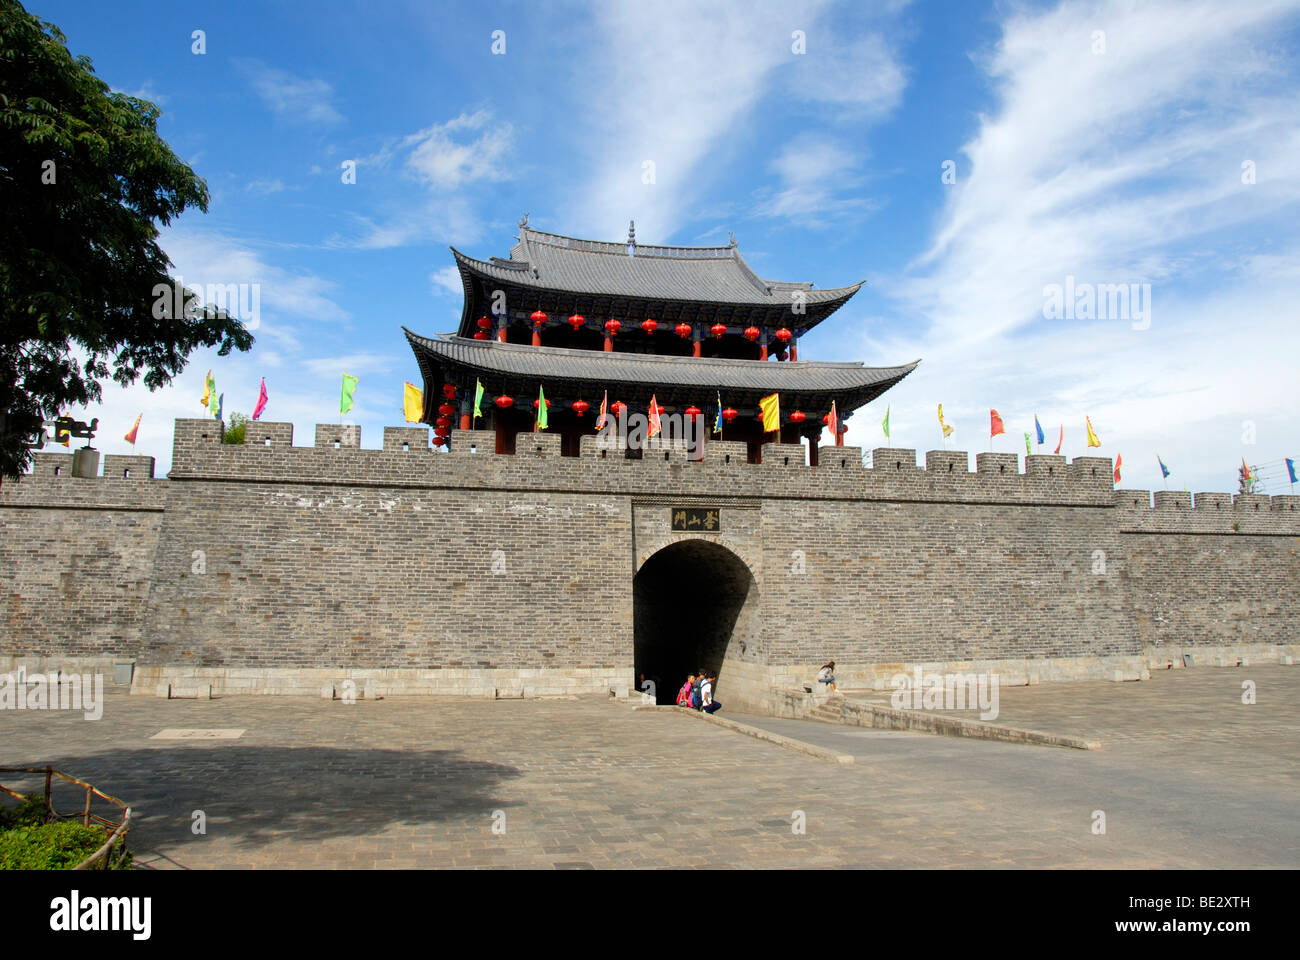 Gate of the city wall, West Gate, Dali, Yunnan Province, People's Republic of China, Asia Stock Photo